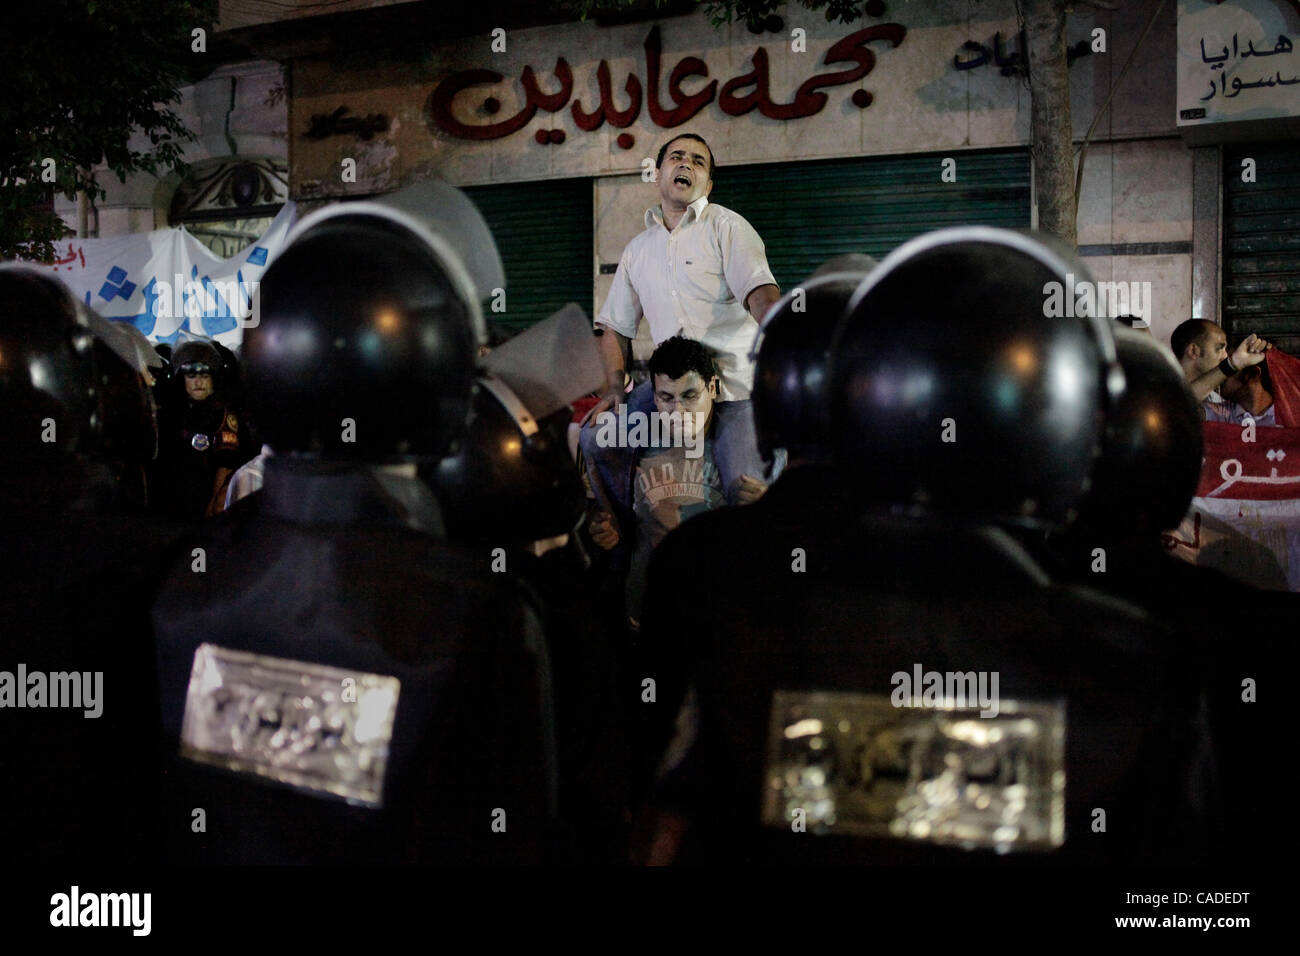 Sep 21, 2010 - Cairo, Egypt - Protesters chanted against Egyptian president H. Mubarak and the possible succession of his son Gamal to the presidency. They stood outside Abdeen Palace and made references to the 1882 uprising, when Ahmed Orabi declared that Egyptians should no longer be slaves. The p Stock Photo